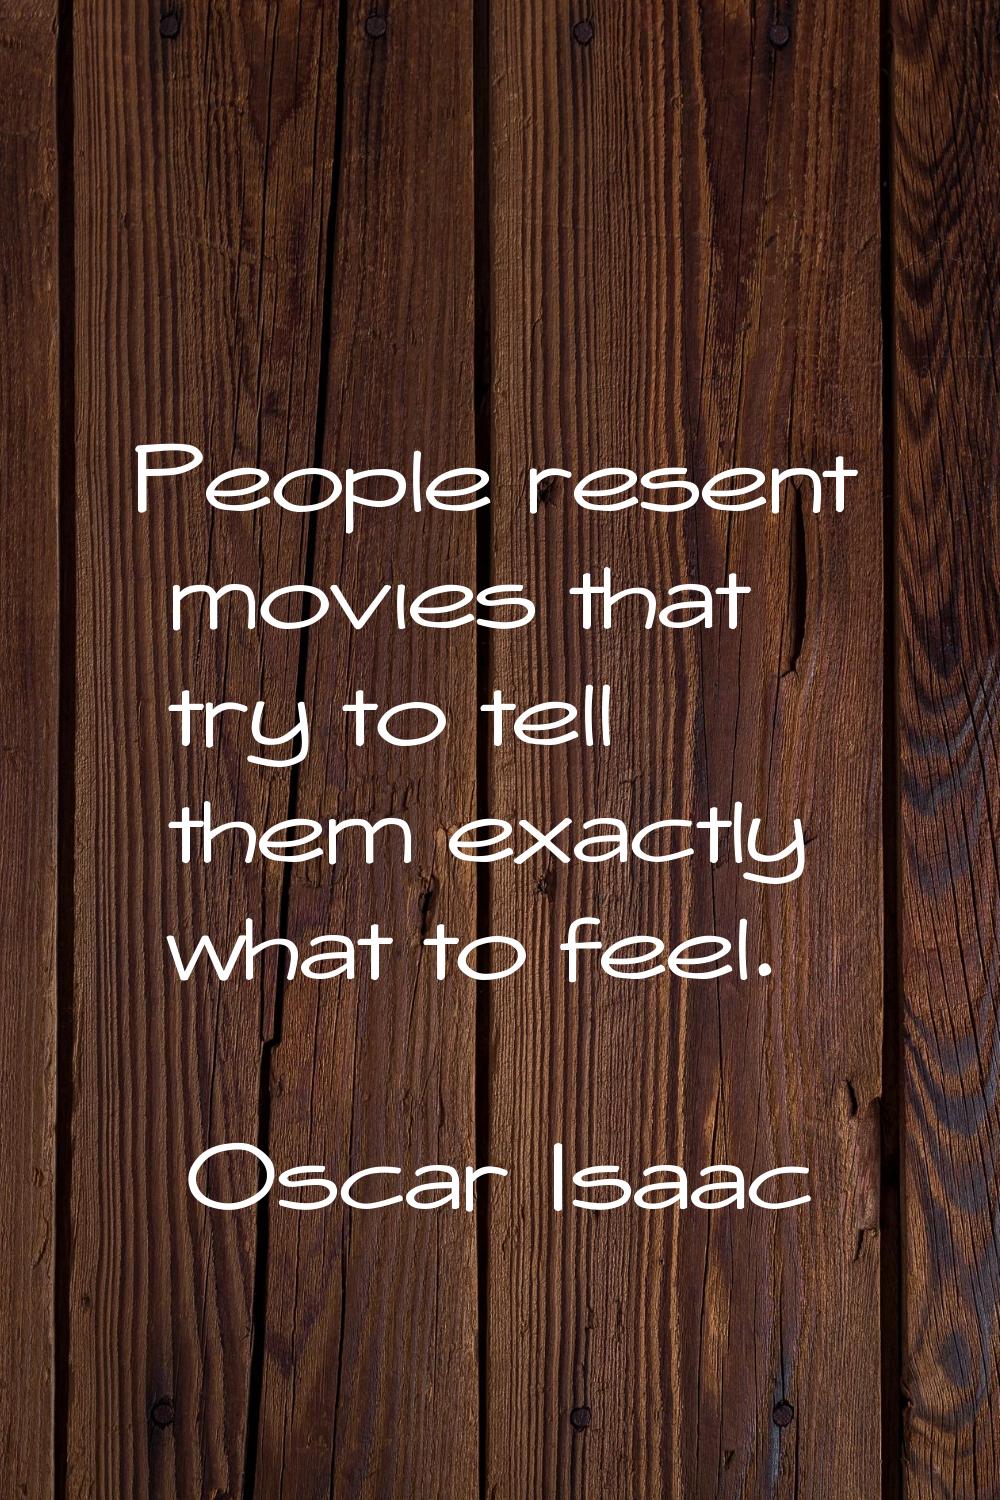 People resent movies that try to tell them exactly what to feel.